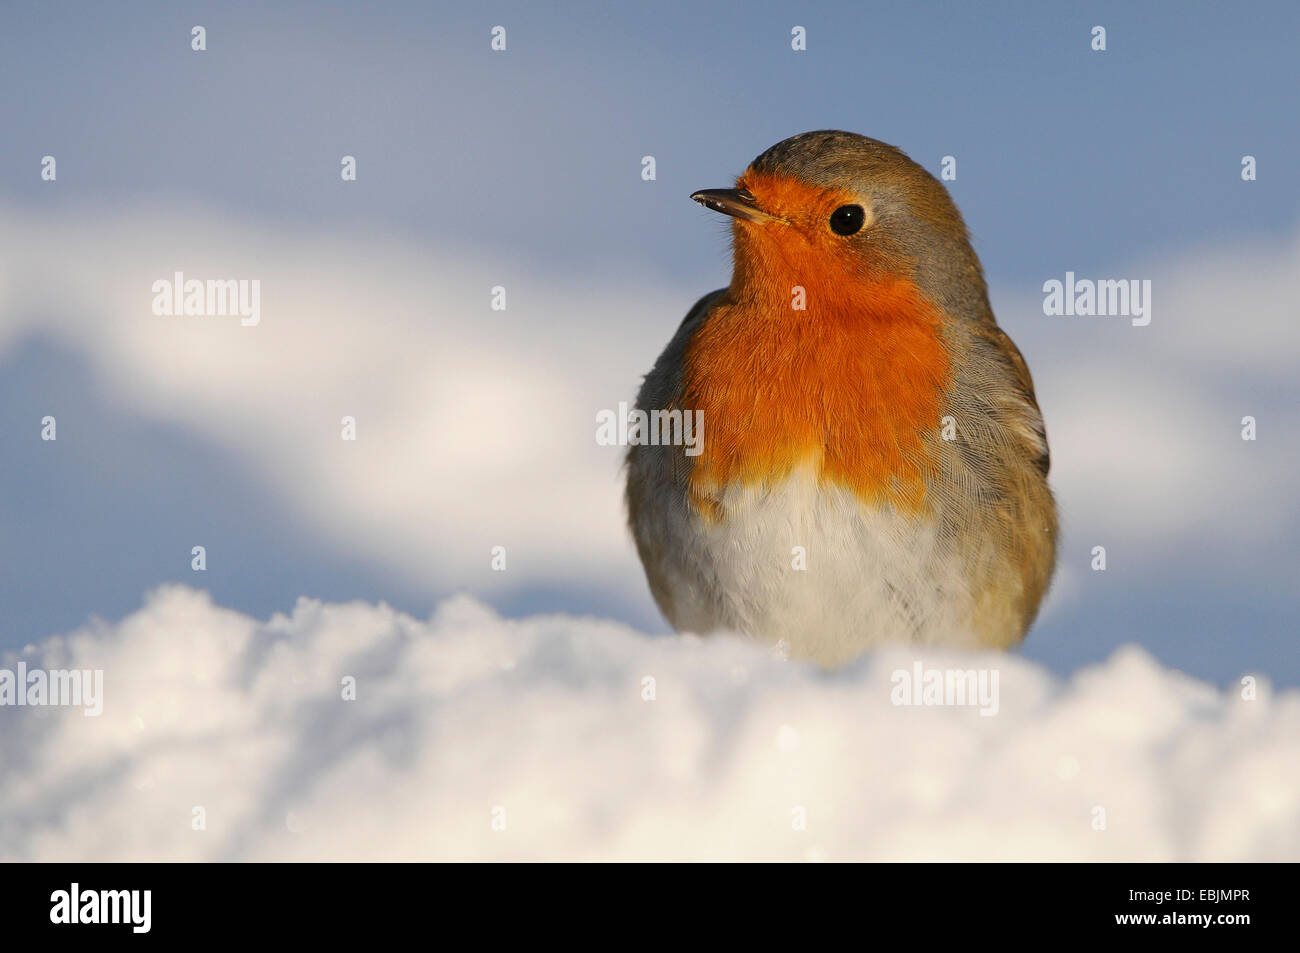 European robin (Erithacus rubecula aux abords), sitting in snow, ALLEMAGNE, Basse-Saxe Banque D'Images